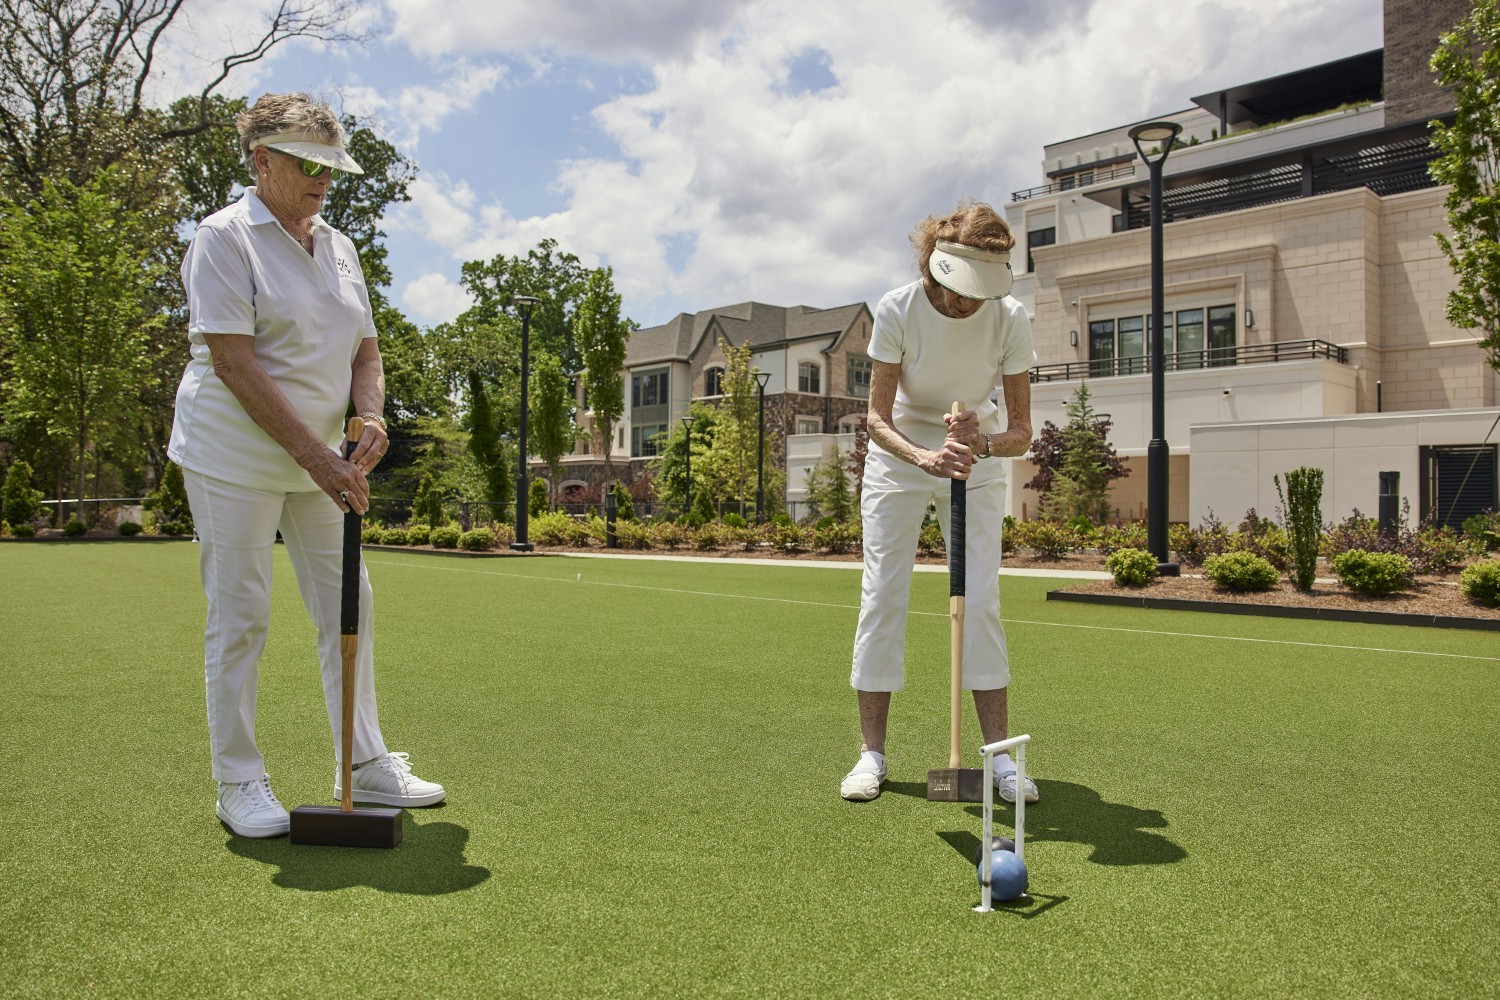 An afternoon playing golf croquet on Lenbrook's full, regulation-size croquet lawn. 